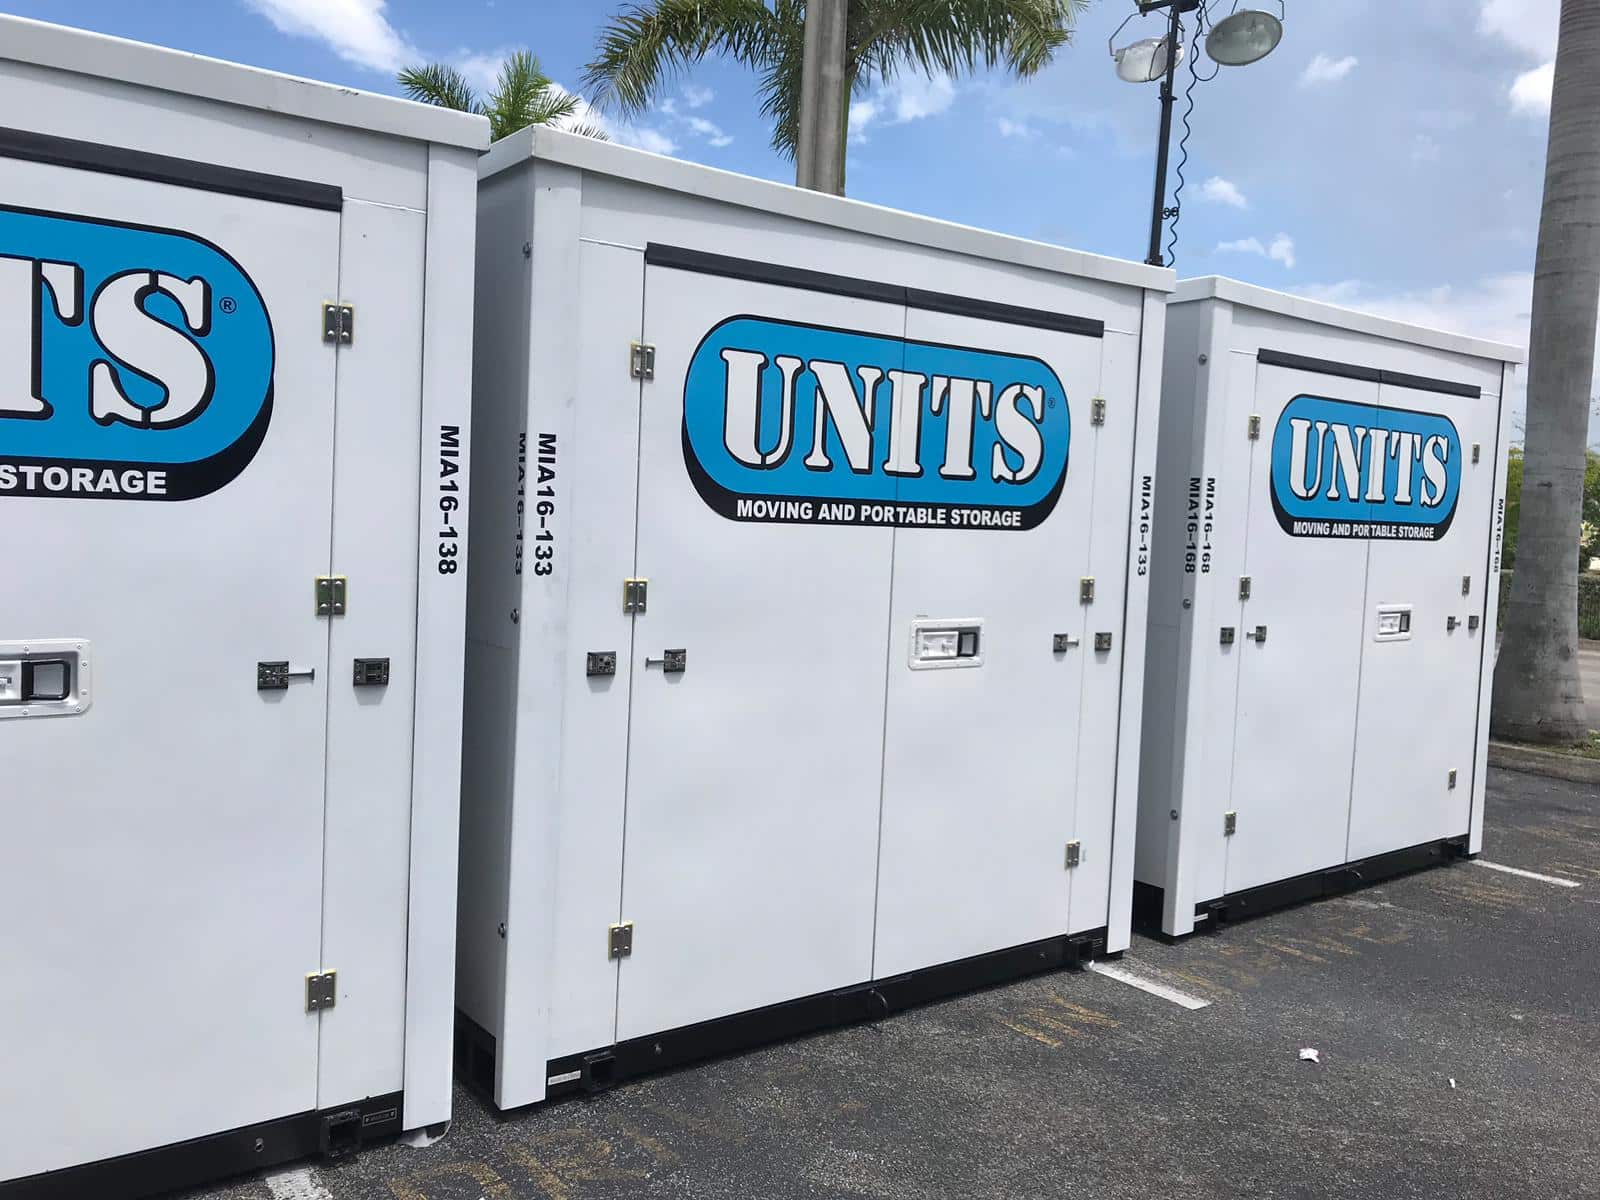 3 UNITS Moving and Portable Storage of Miami containers sitting in a parking lot next to each other.